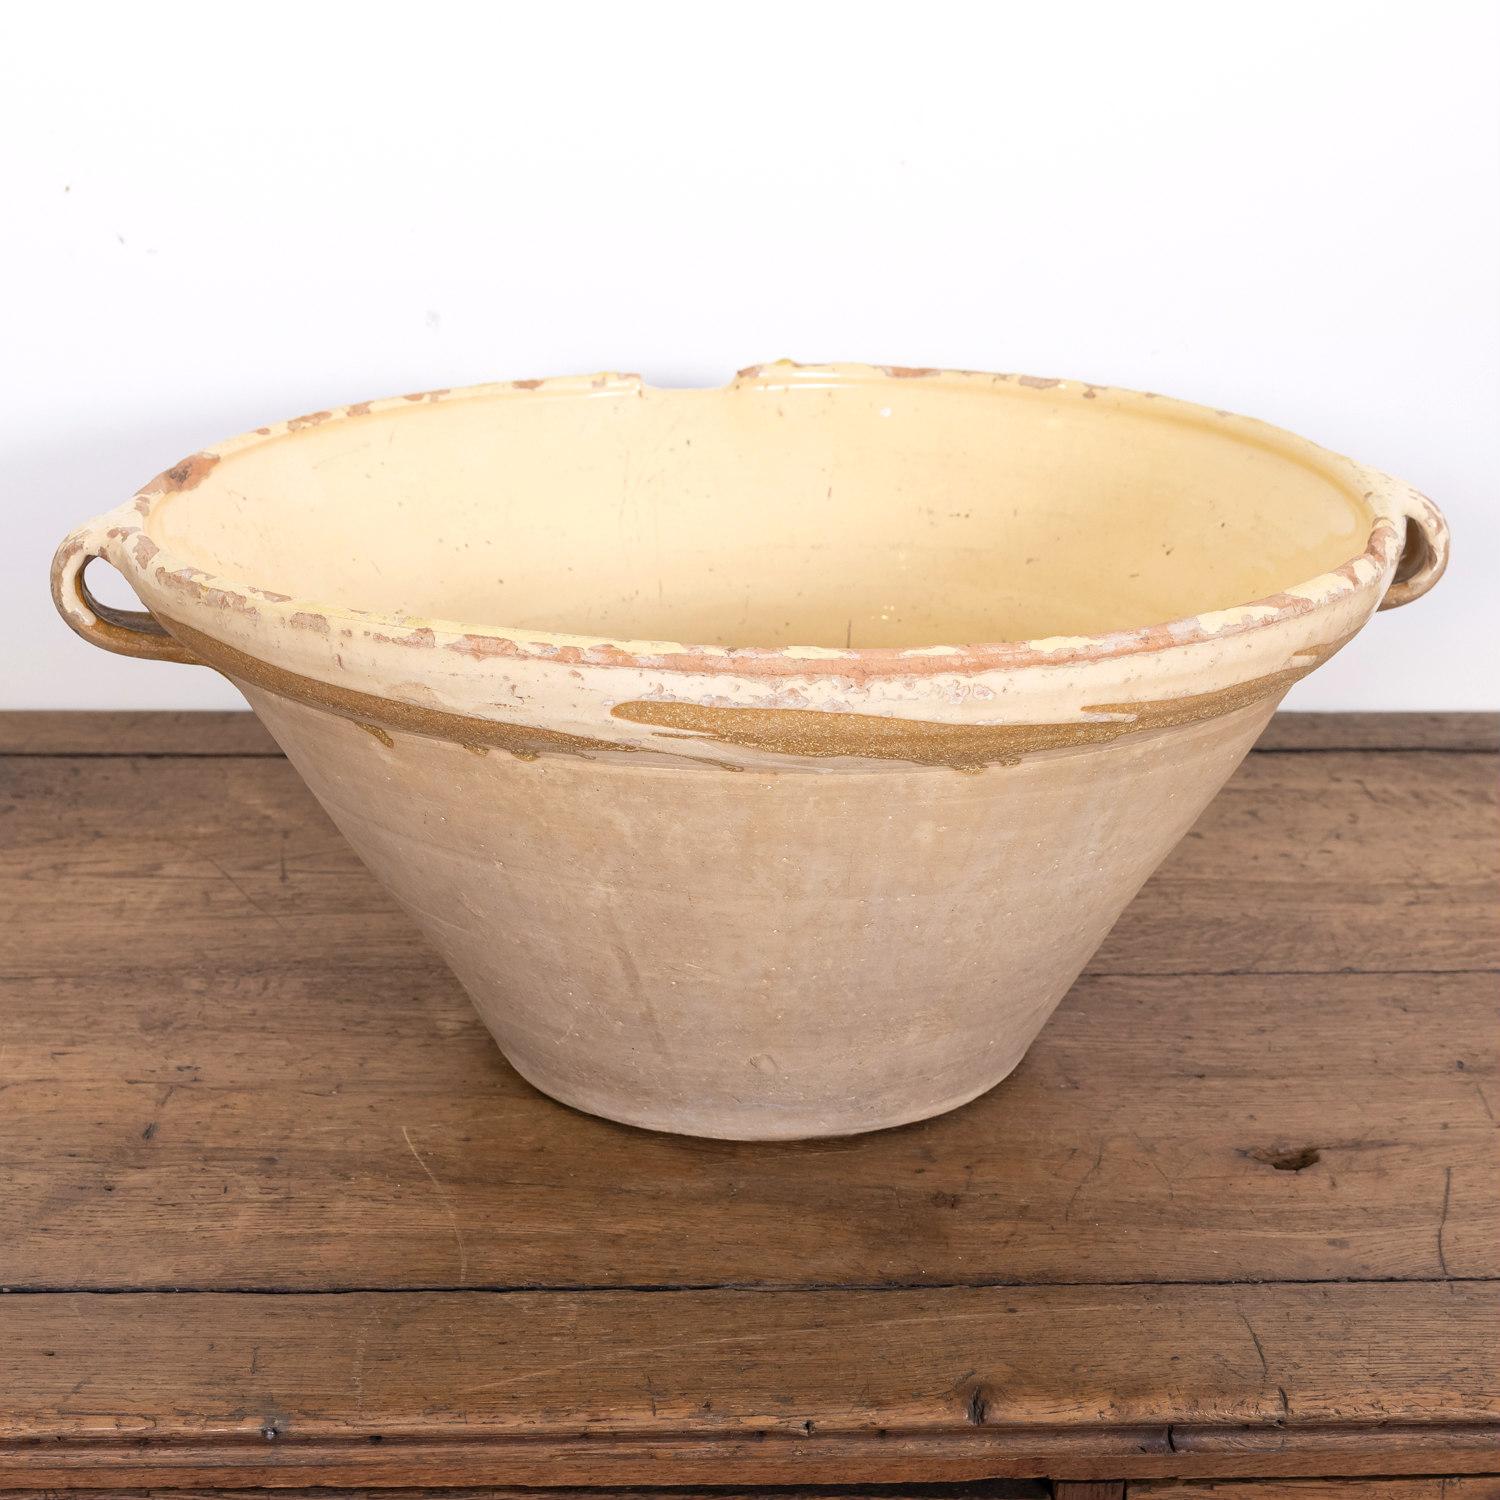 Late 19th Century Large Antique French Terracotta Tian Bowl with Pale Yellow Glaze